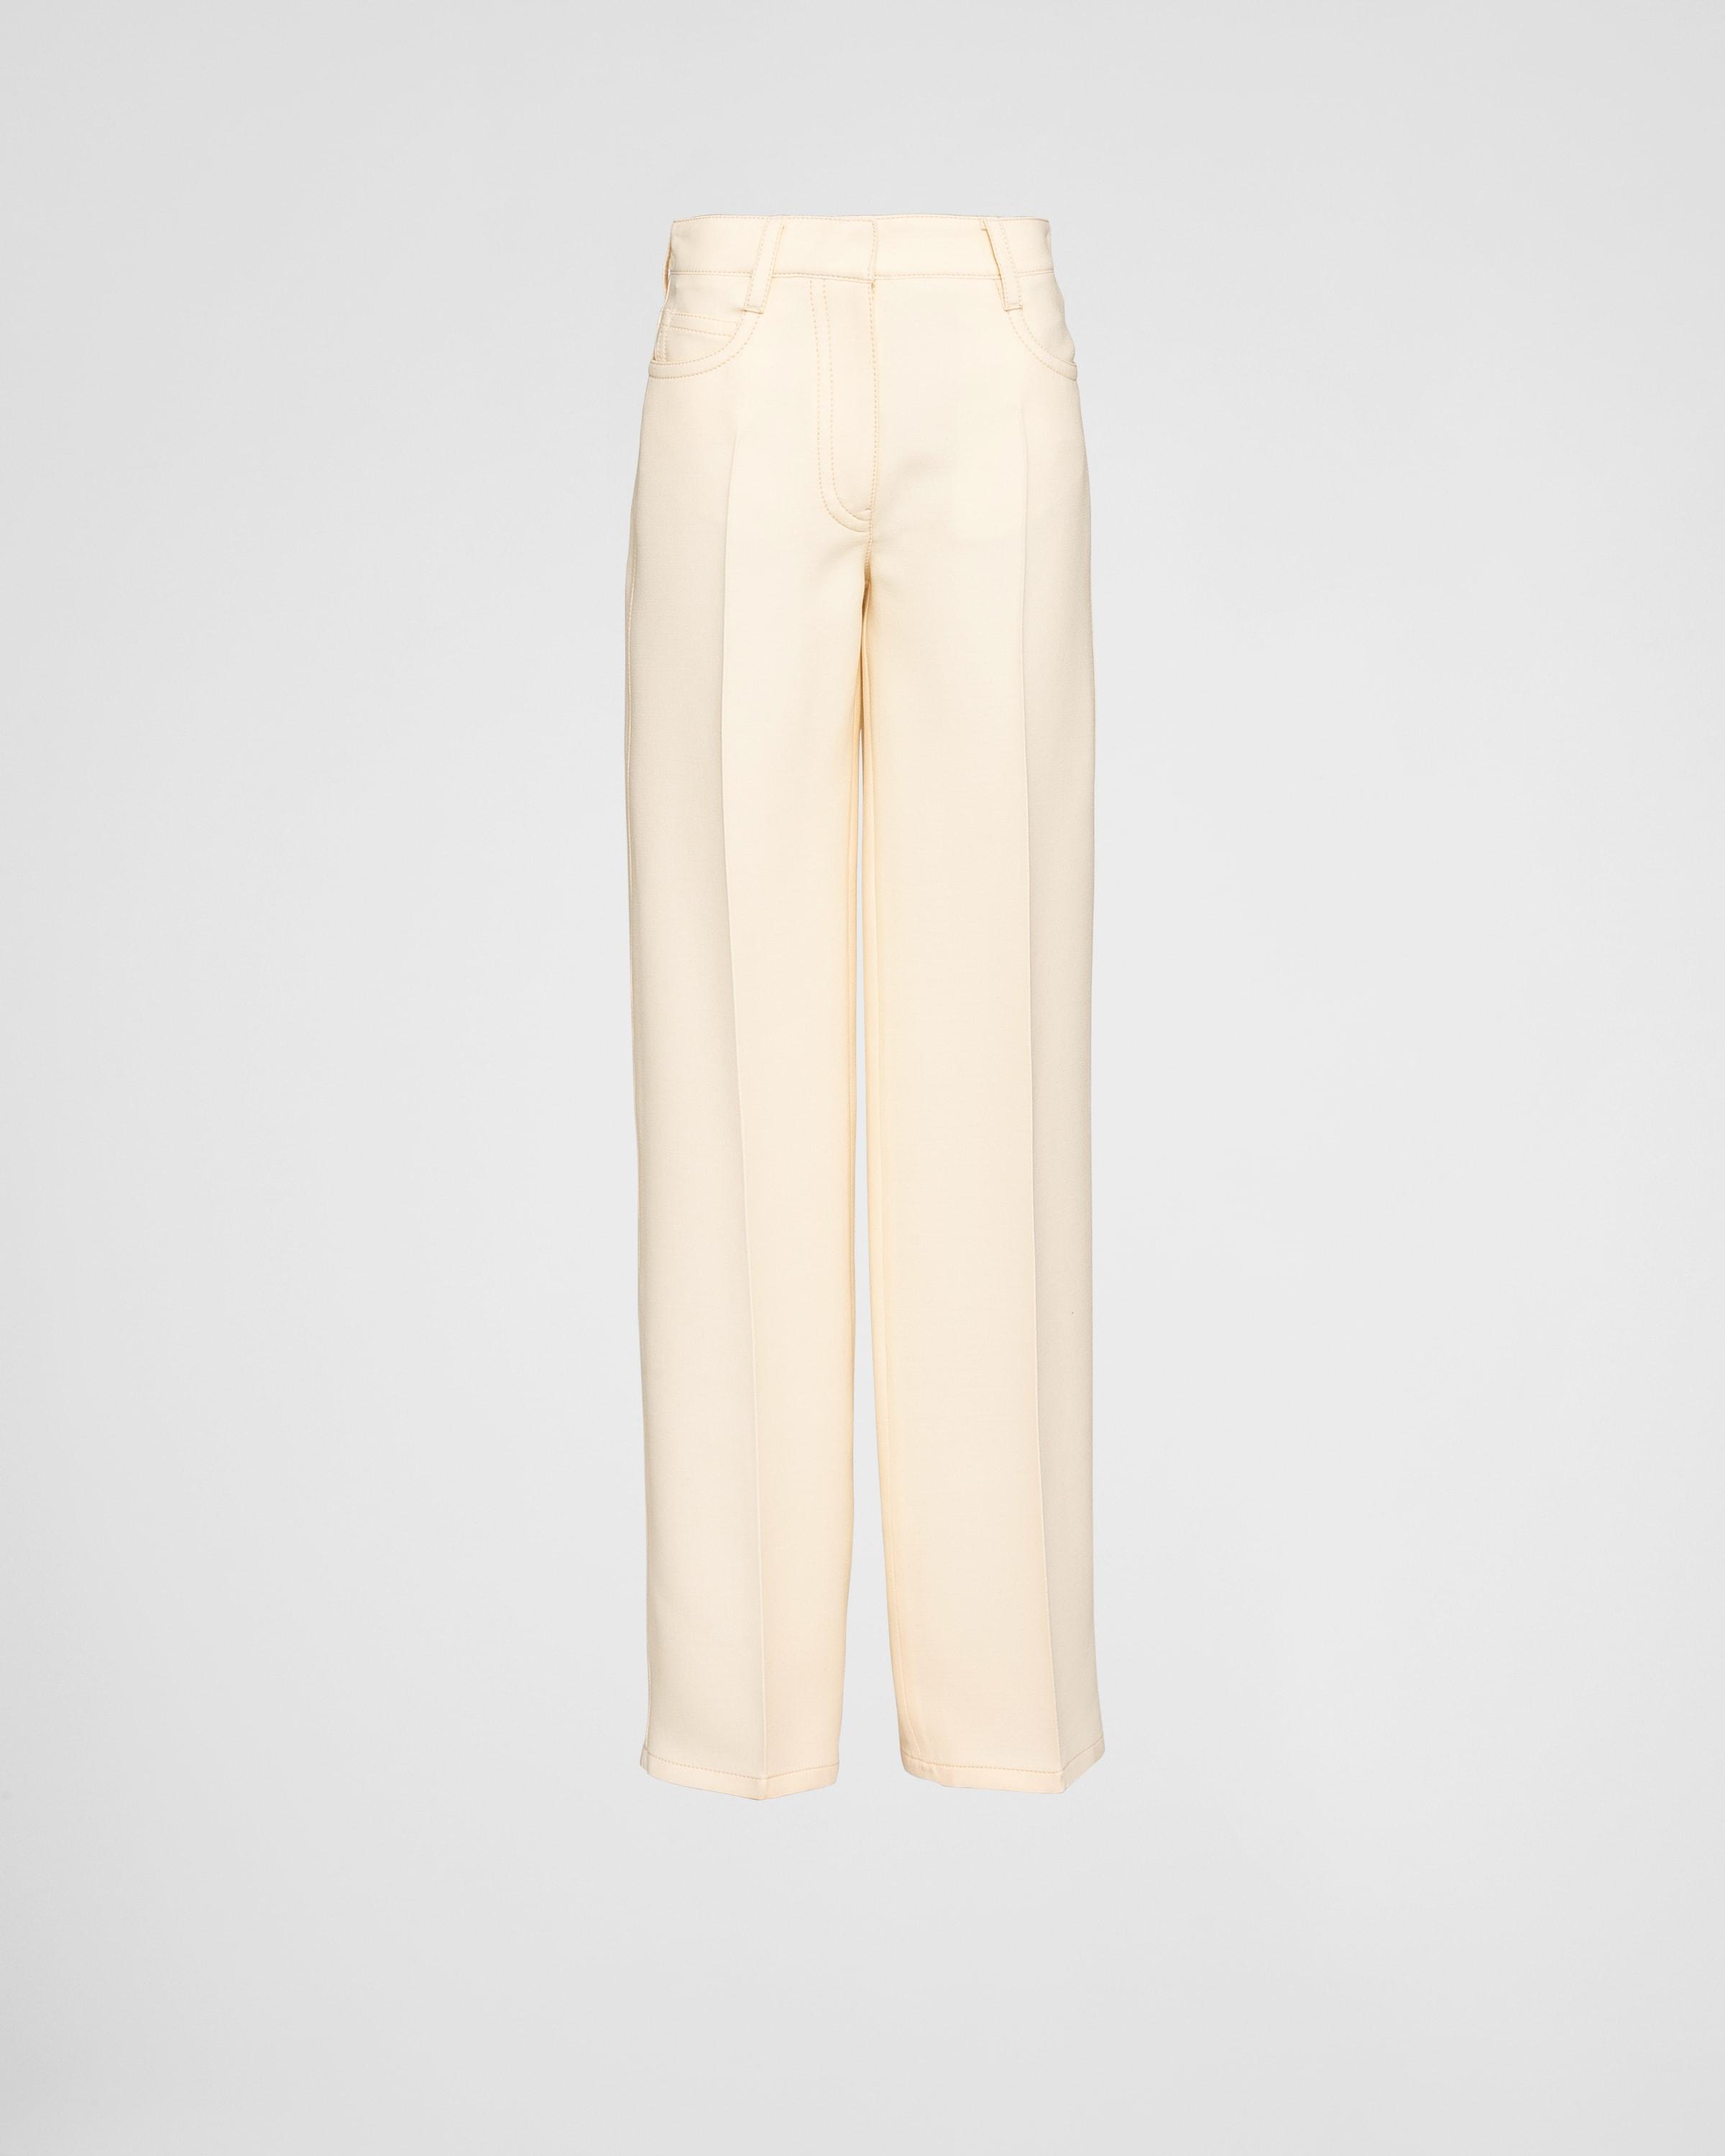 Prada Tricotine Pants in White | Lyst